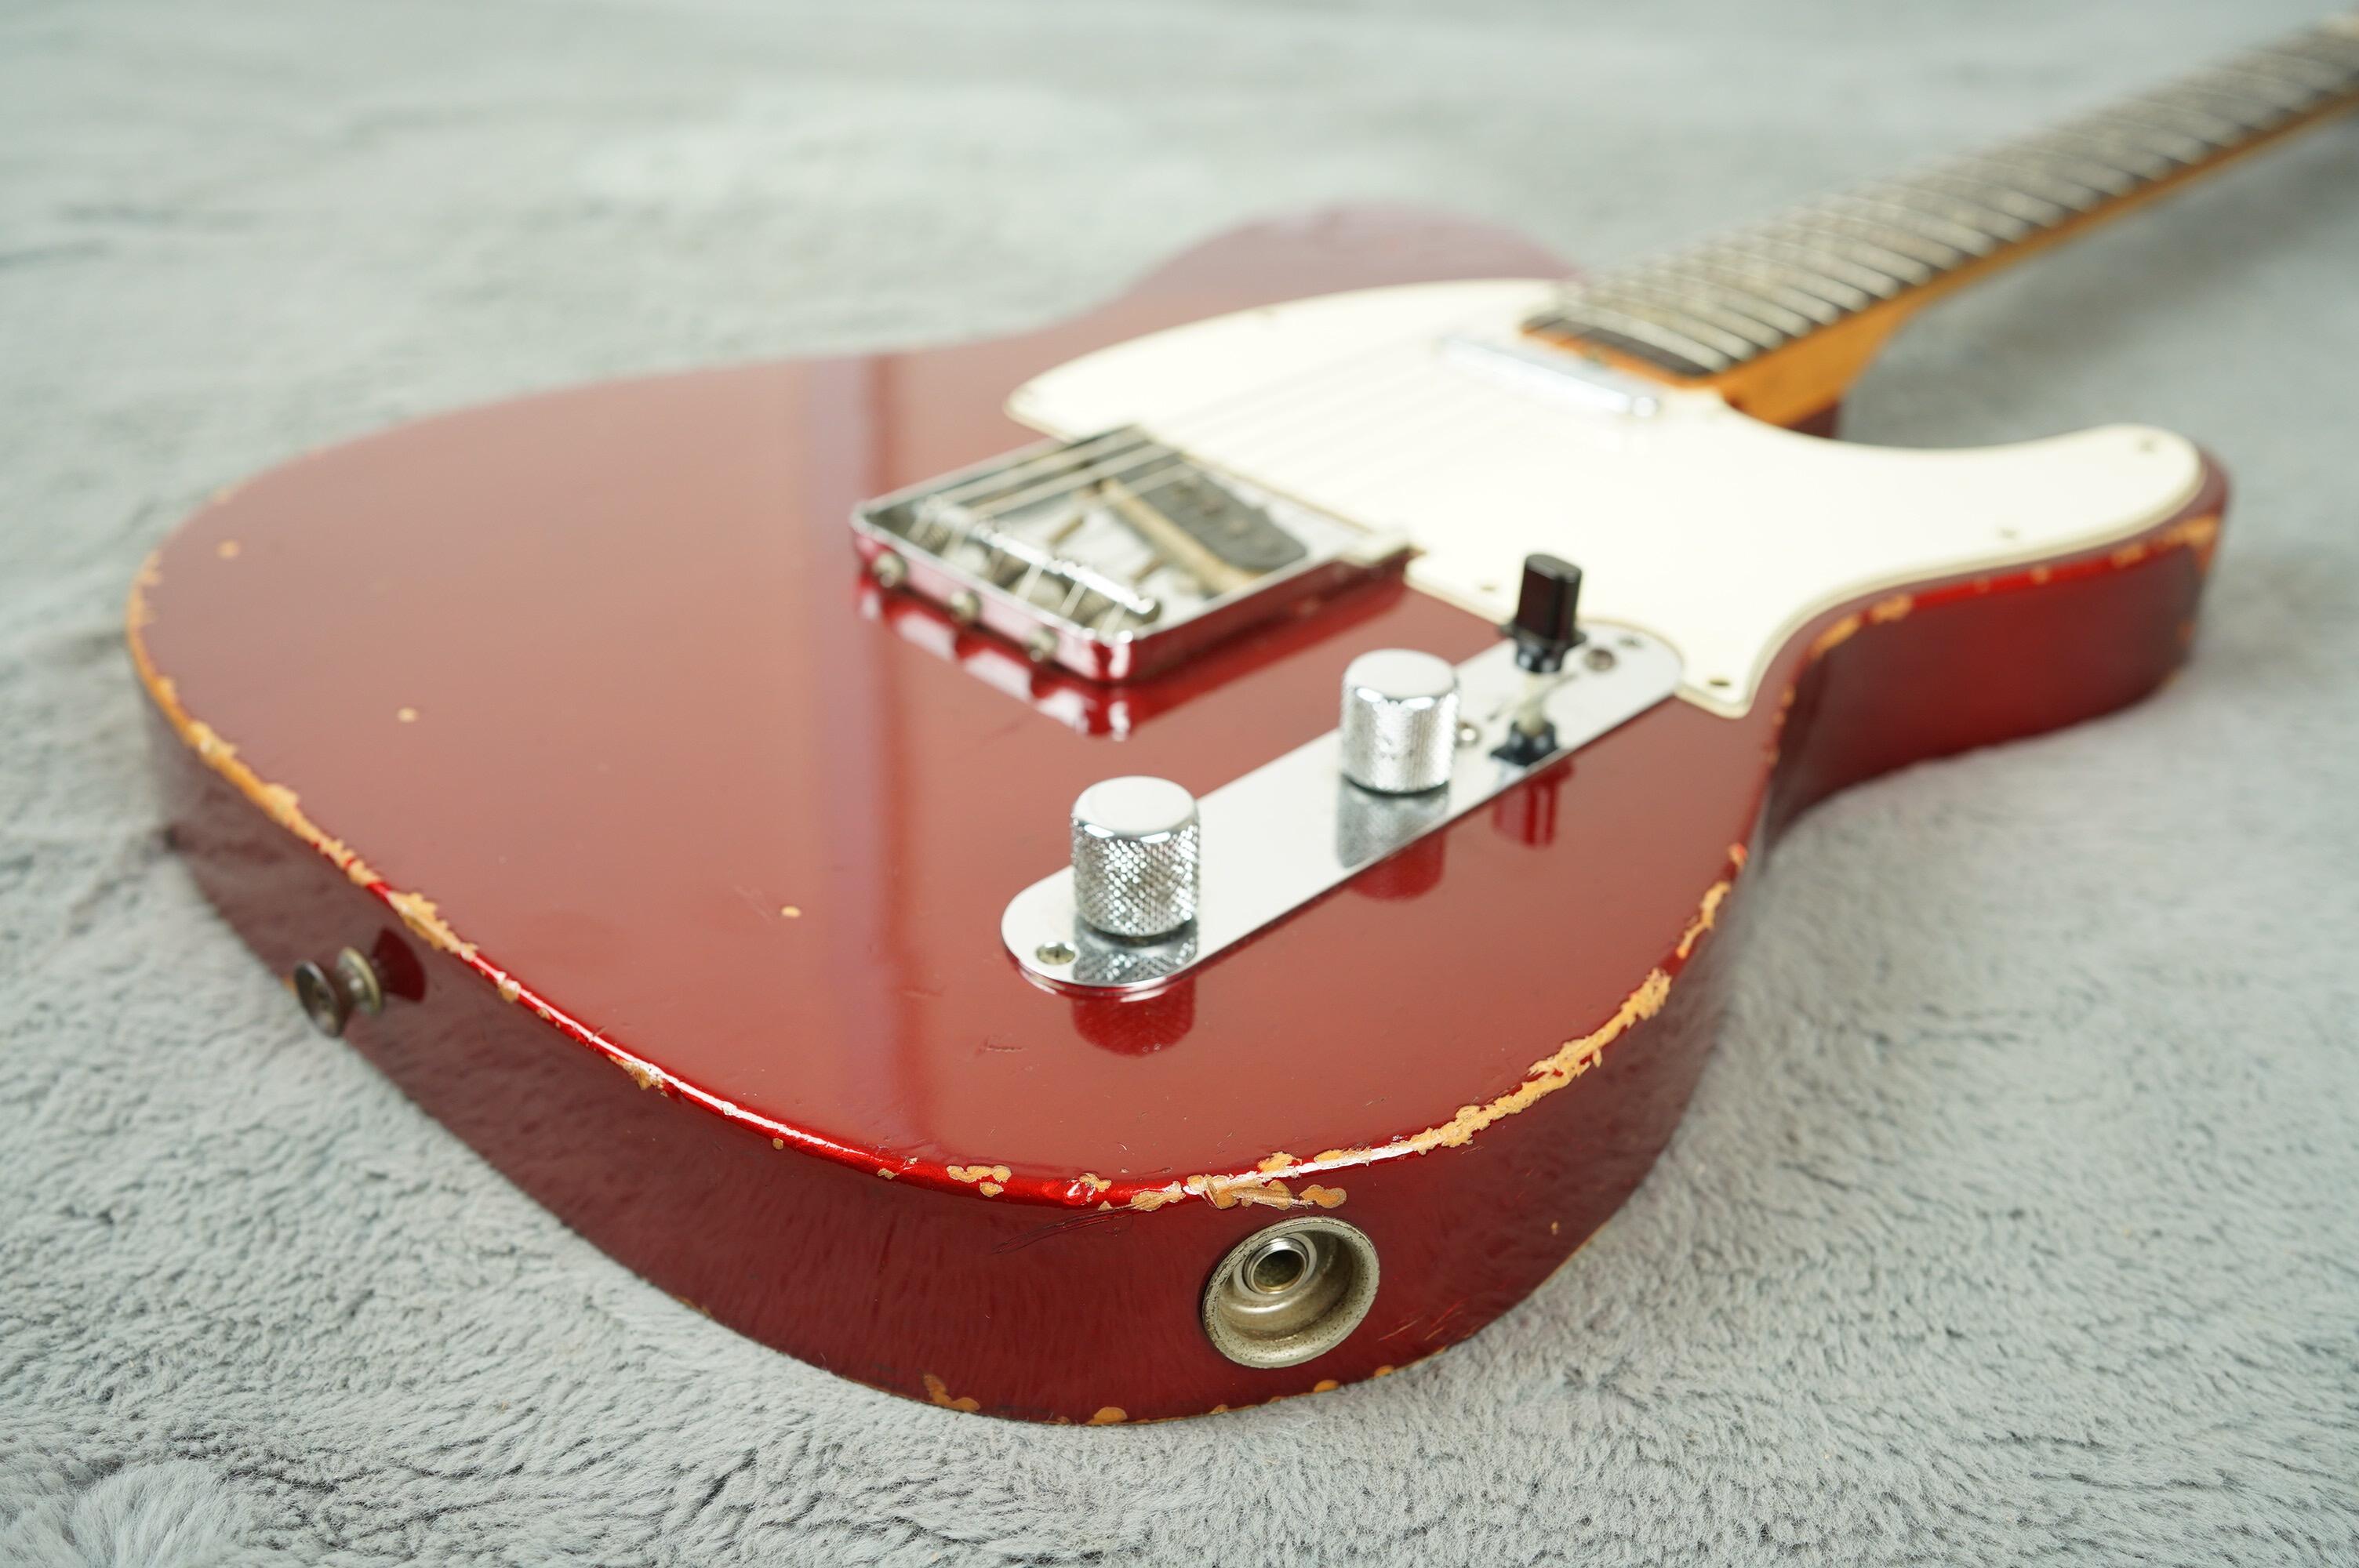 1968 Fender Telecaster Candy Apple Red